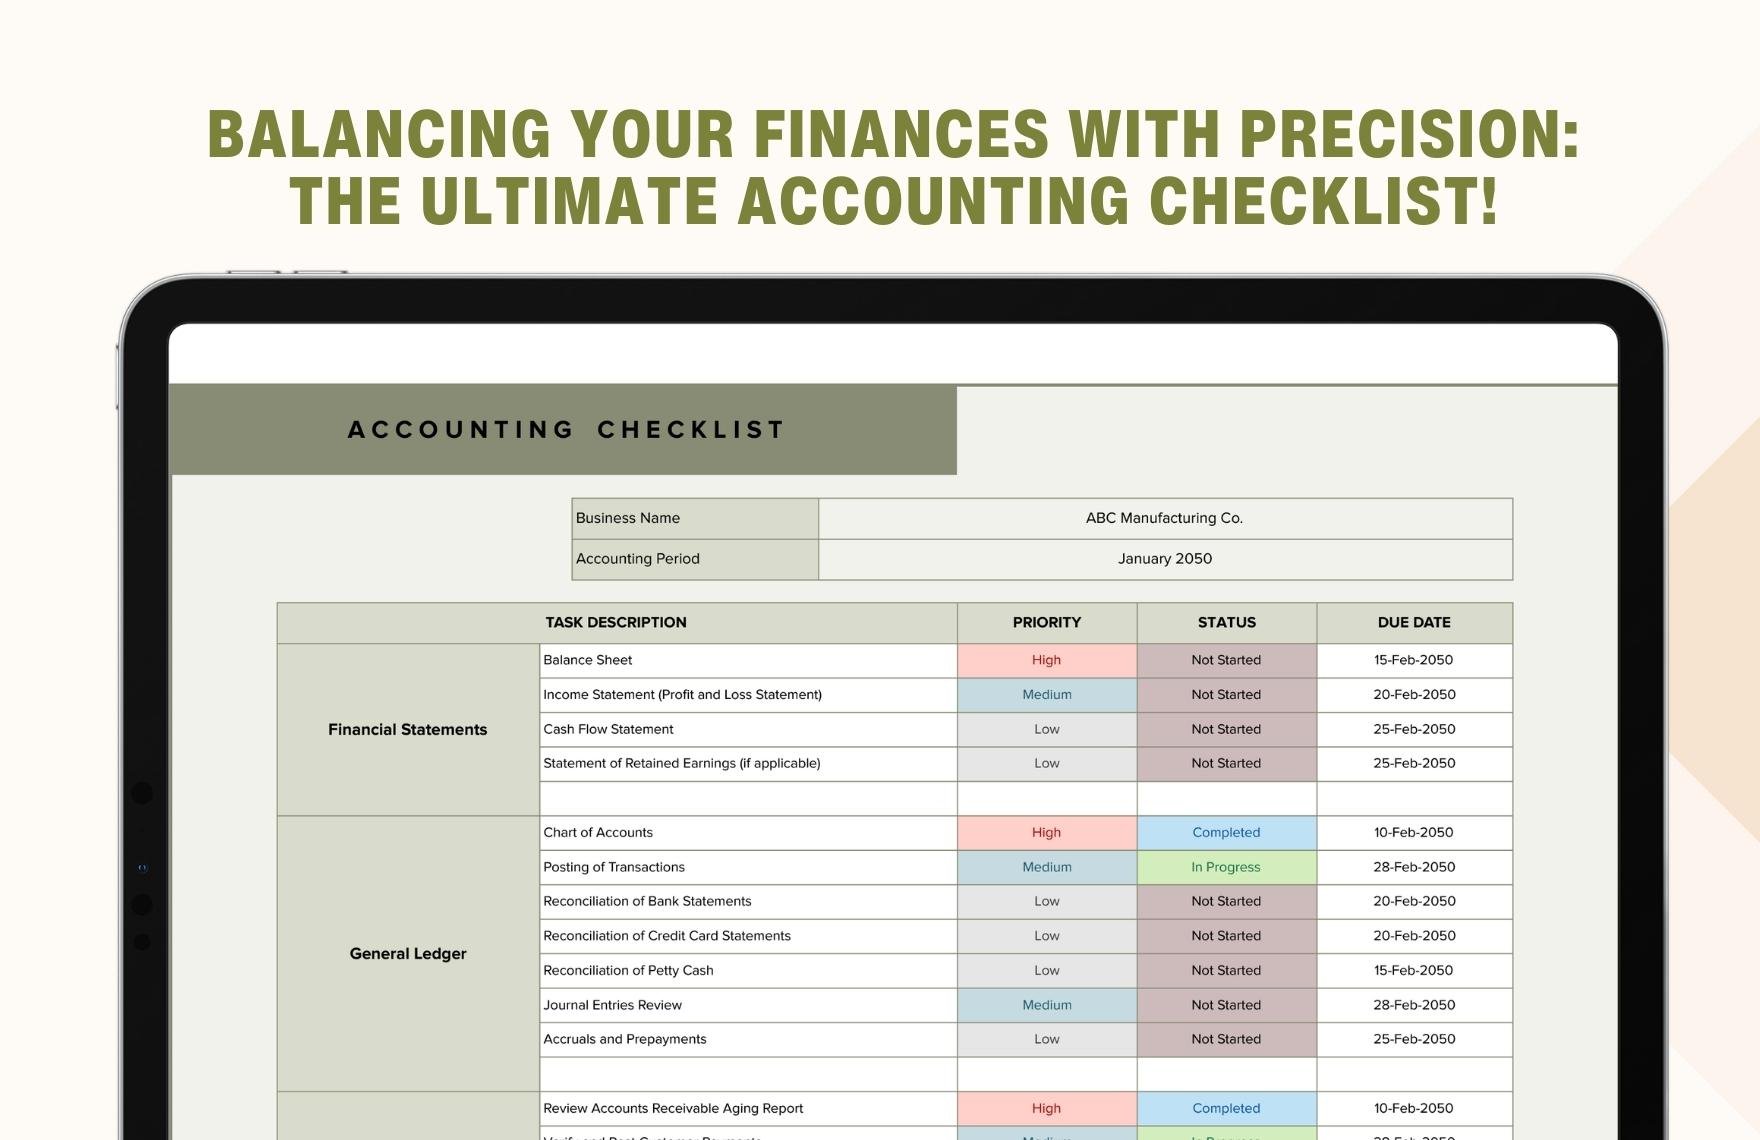 Accounting Checklist Template